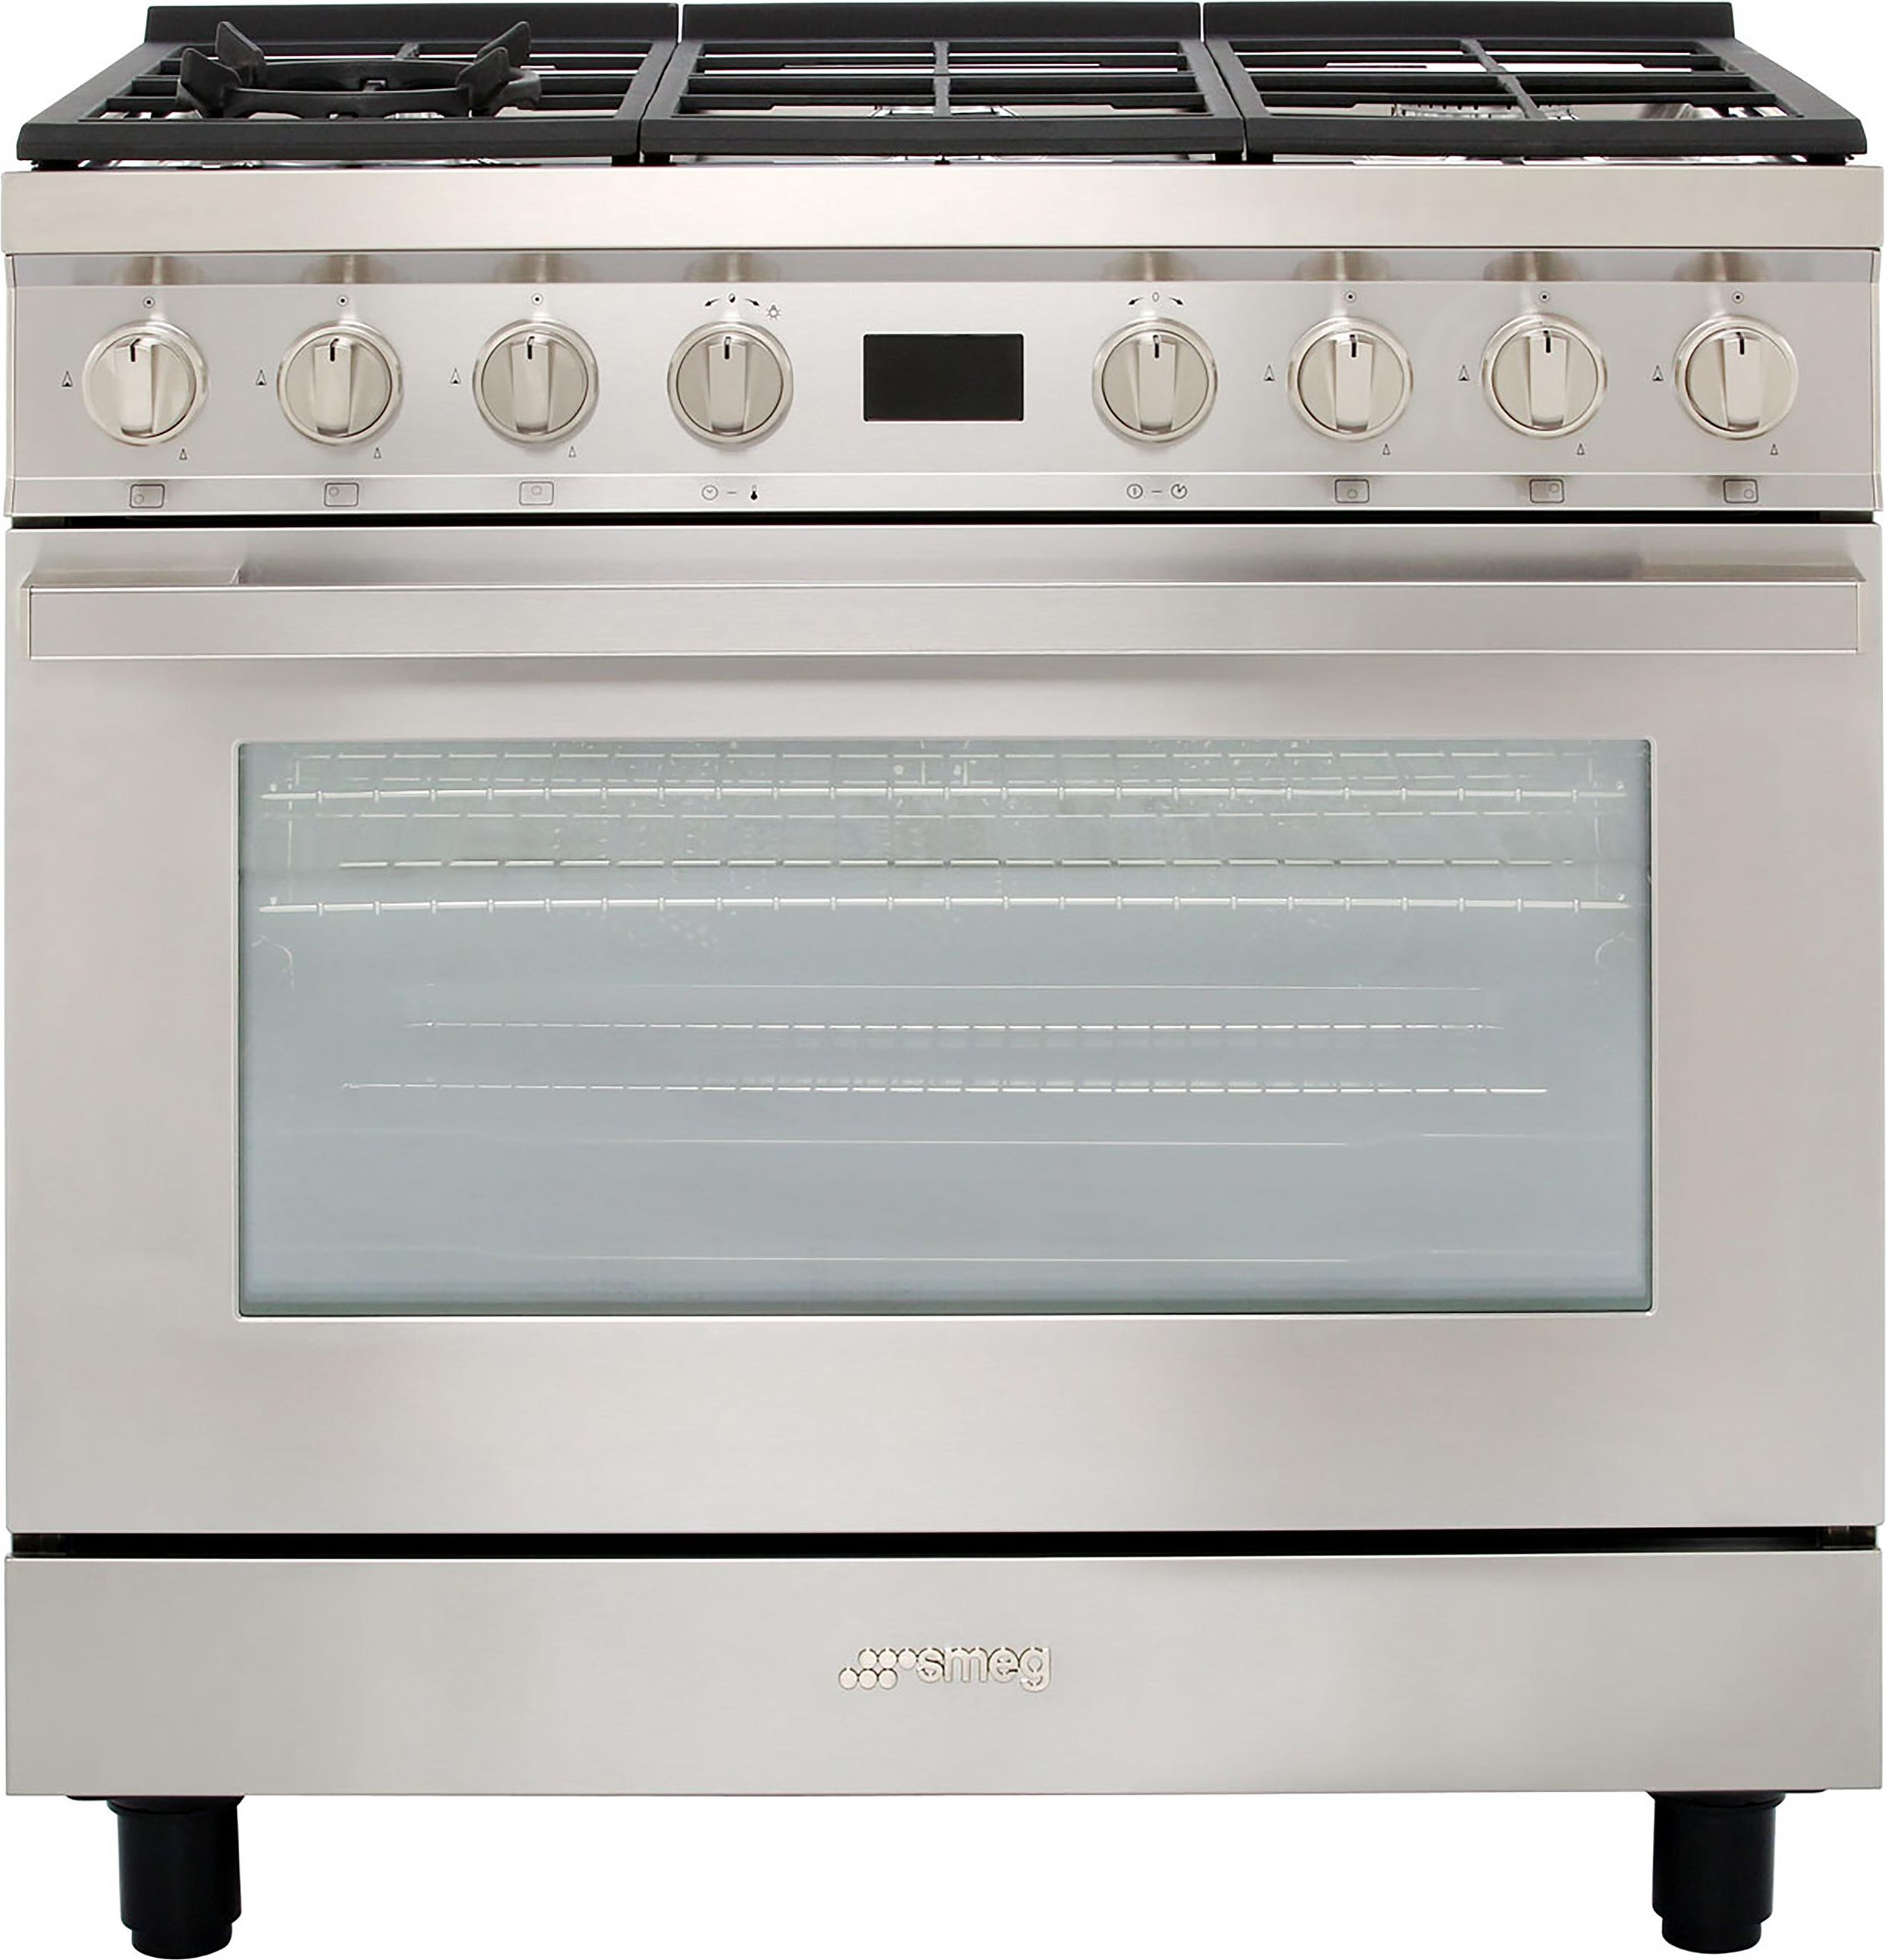 Smeg Portofino CPF9GPX 90cm Dual Fuel Range Cooker - Stainless Steel - A+ Rated, Stainless Steel